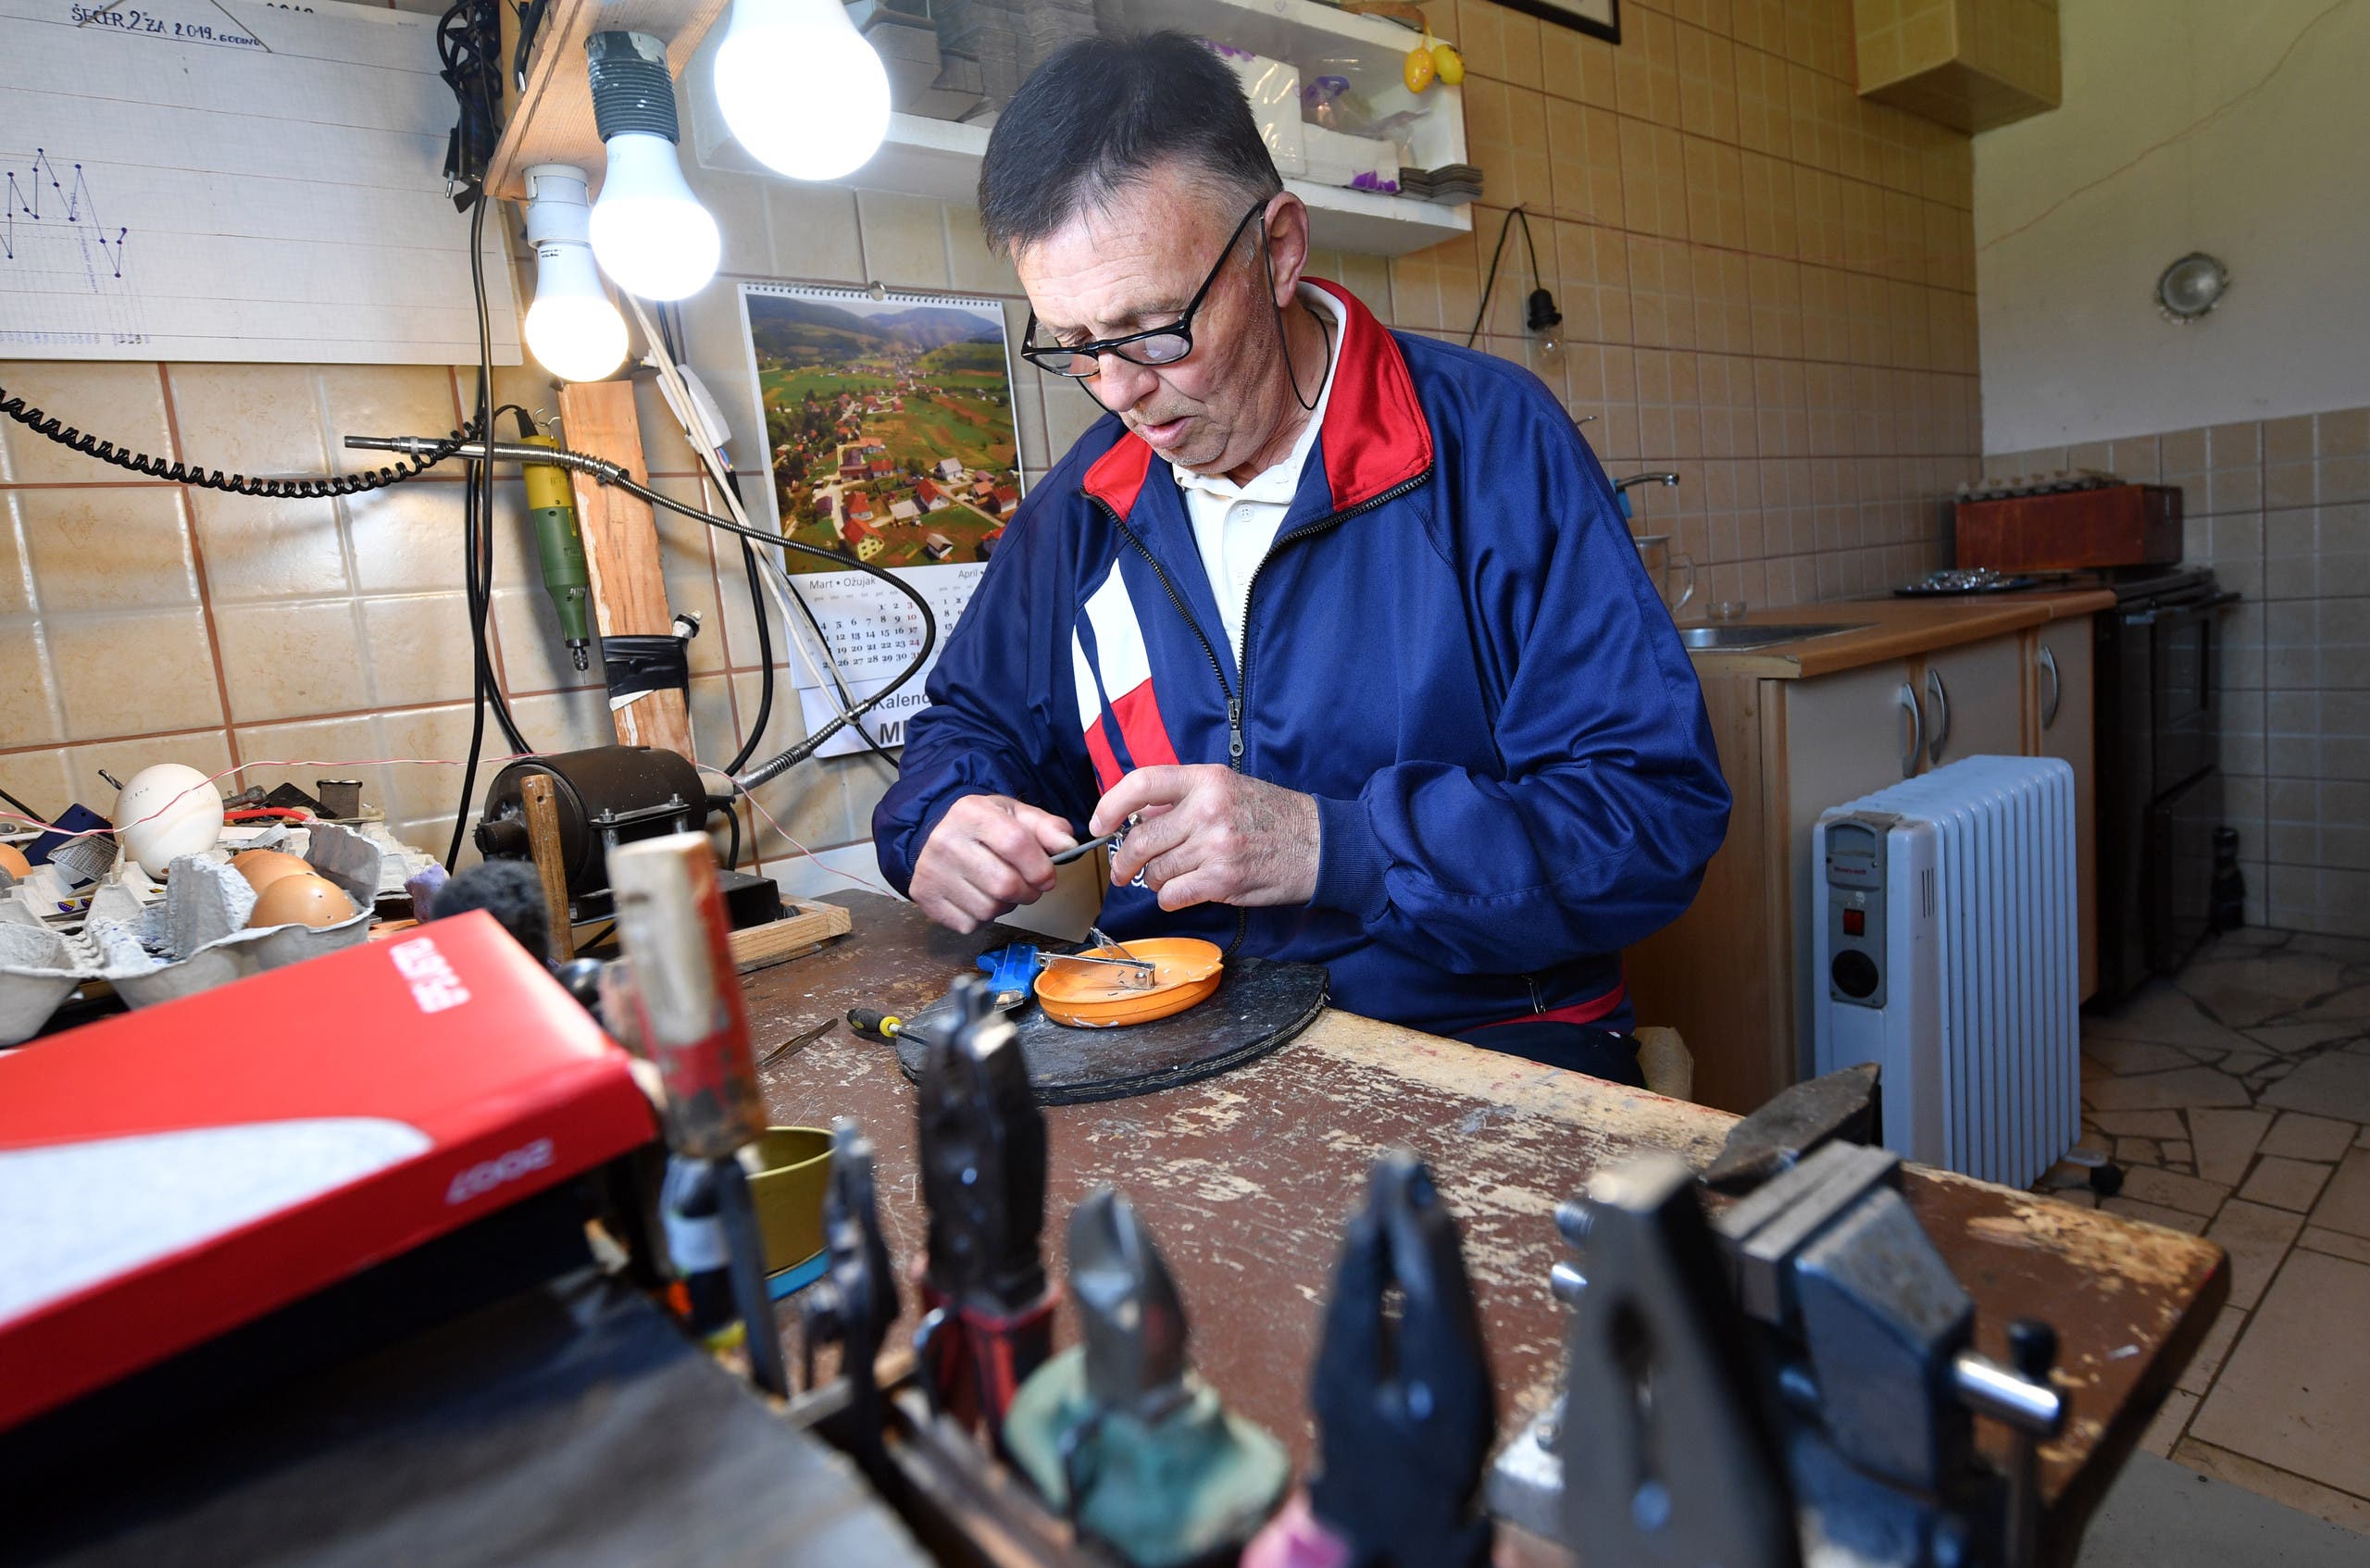 Stjepan Biletic, 71, handcrafts man from Central-Bosnian town of Kresevo, nails miniature horseshoe onto an egg, in his workshop, on April 17, 2019.(AFP)